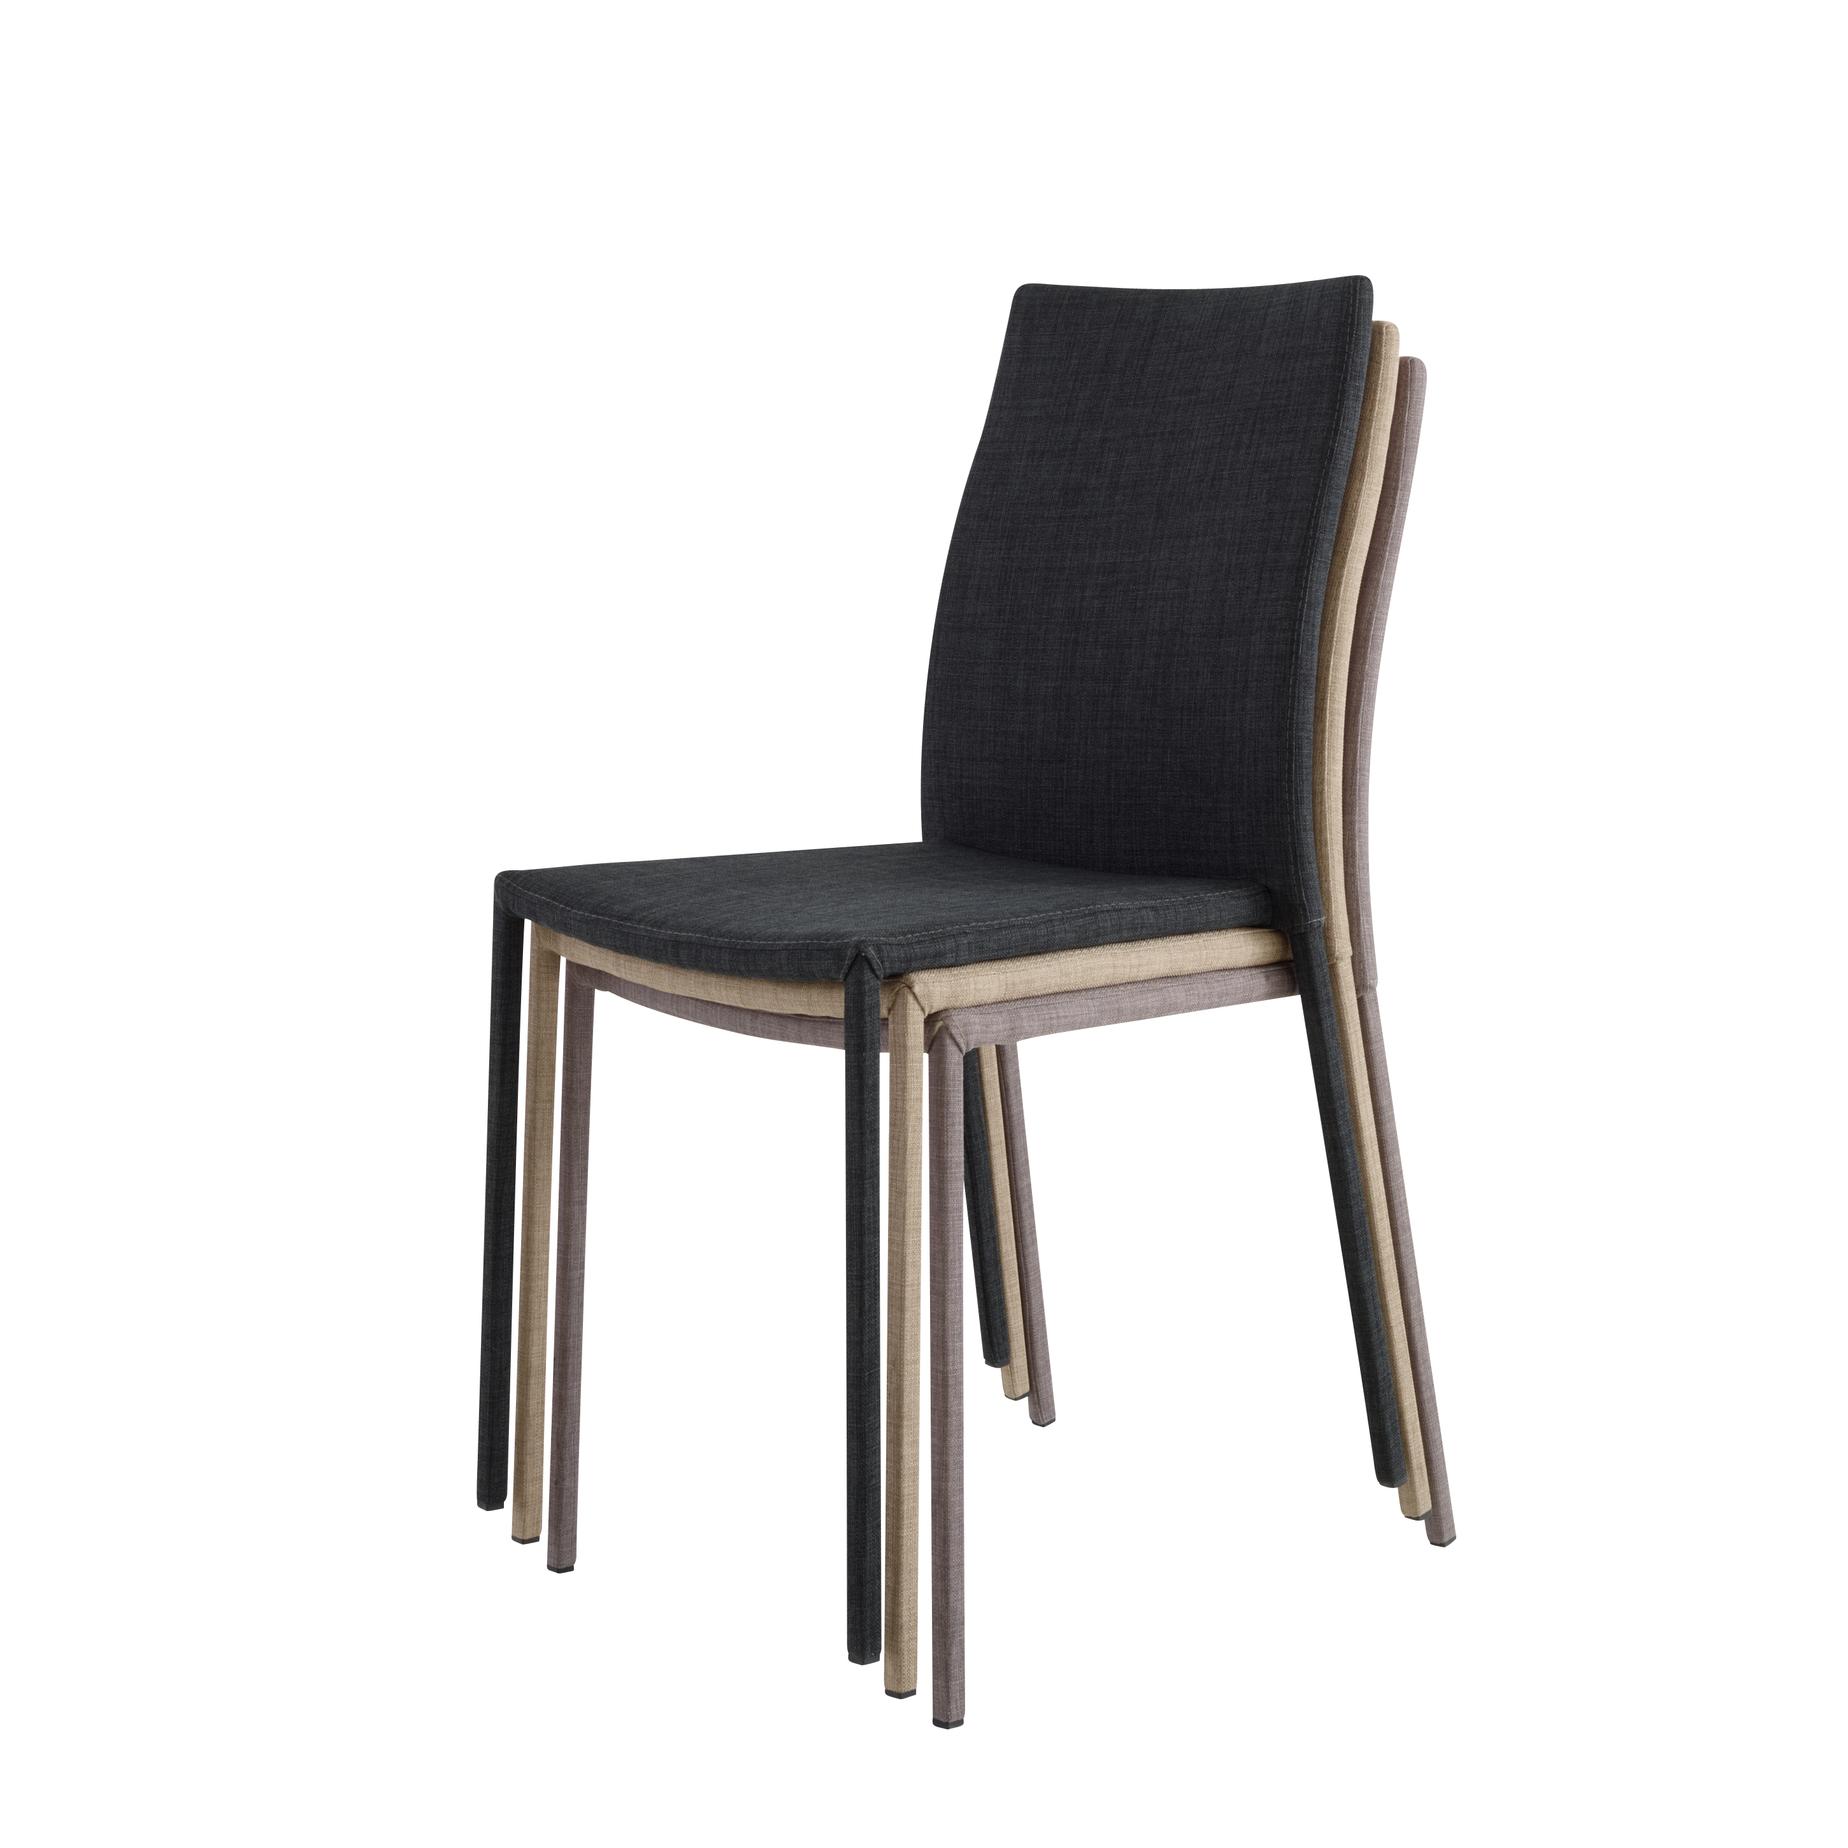 Slim Chair Chairs From Designer Ligne Roset Official Site